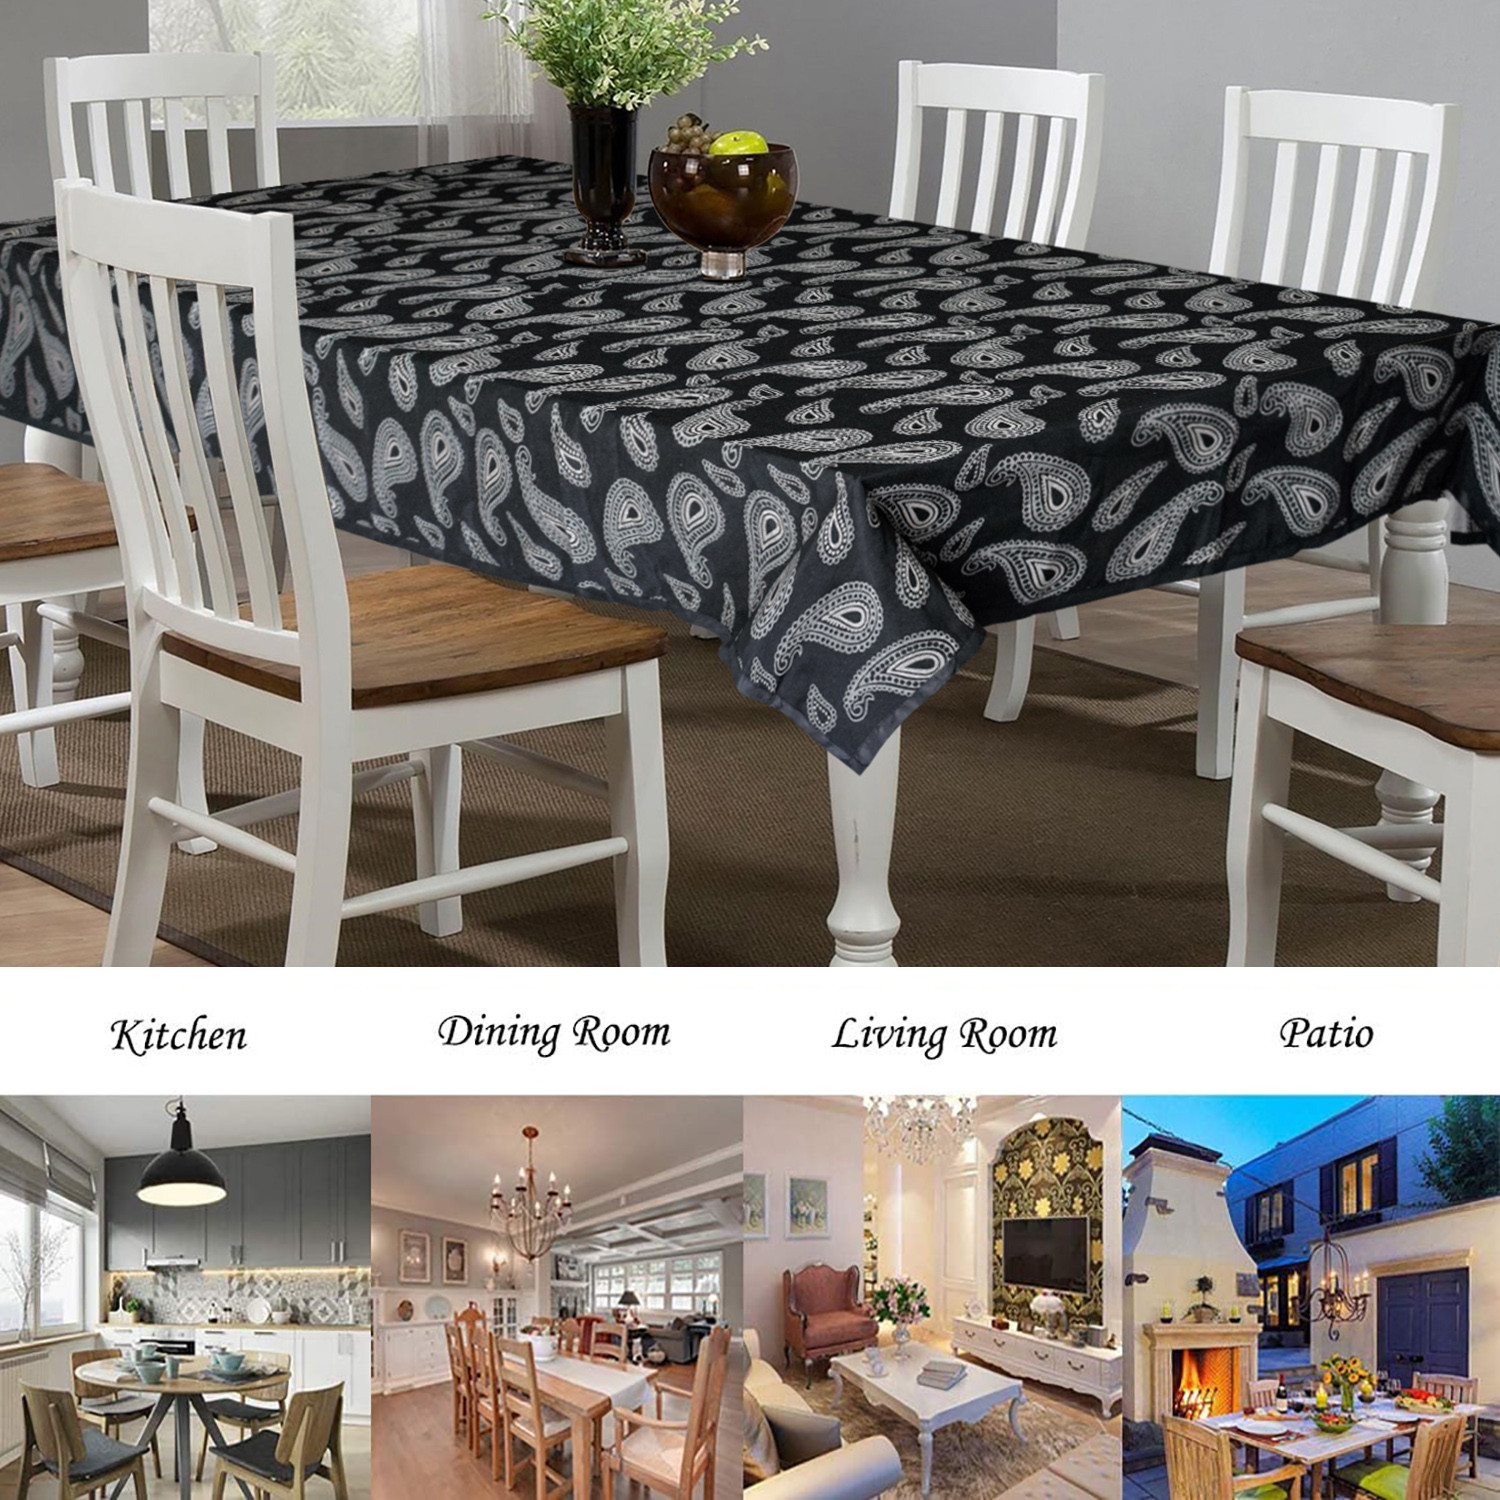 Kuber Industries Cotton Carry Print 6 Seater Dining Table Cover/Table Cloth For Home & Dining Table (Black) 54KM4373